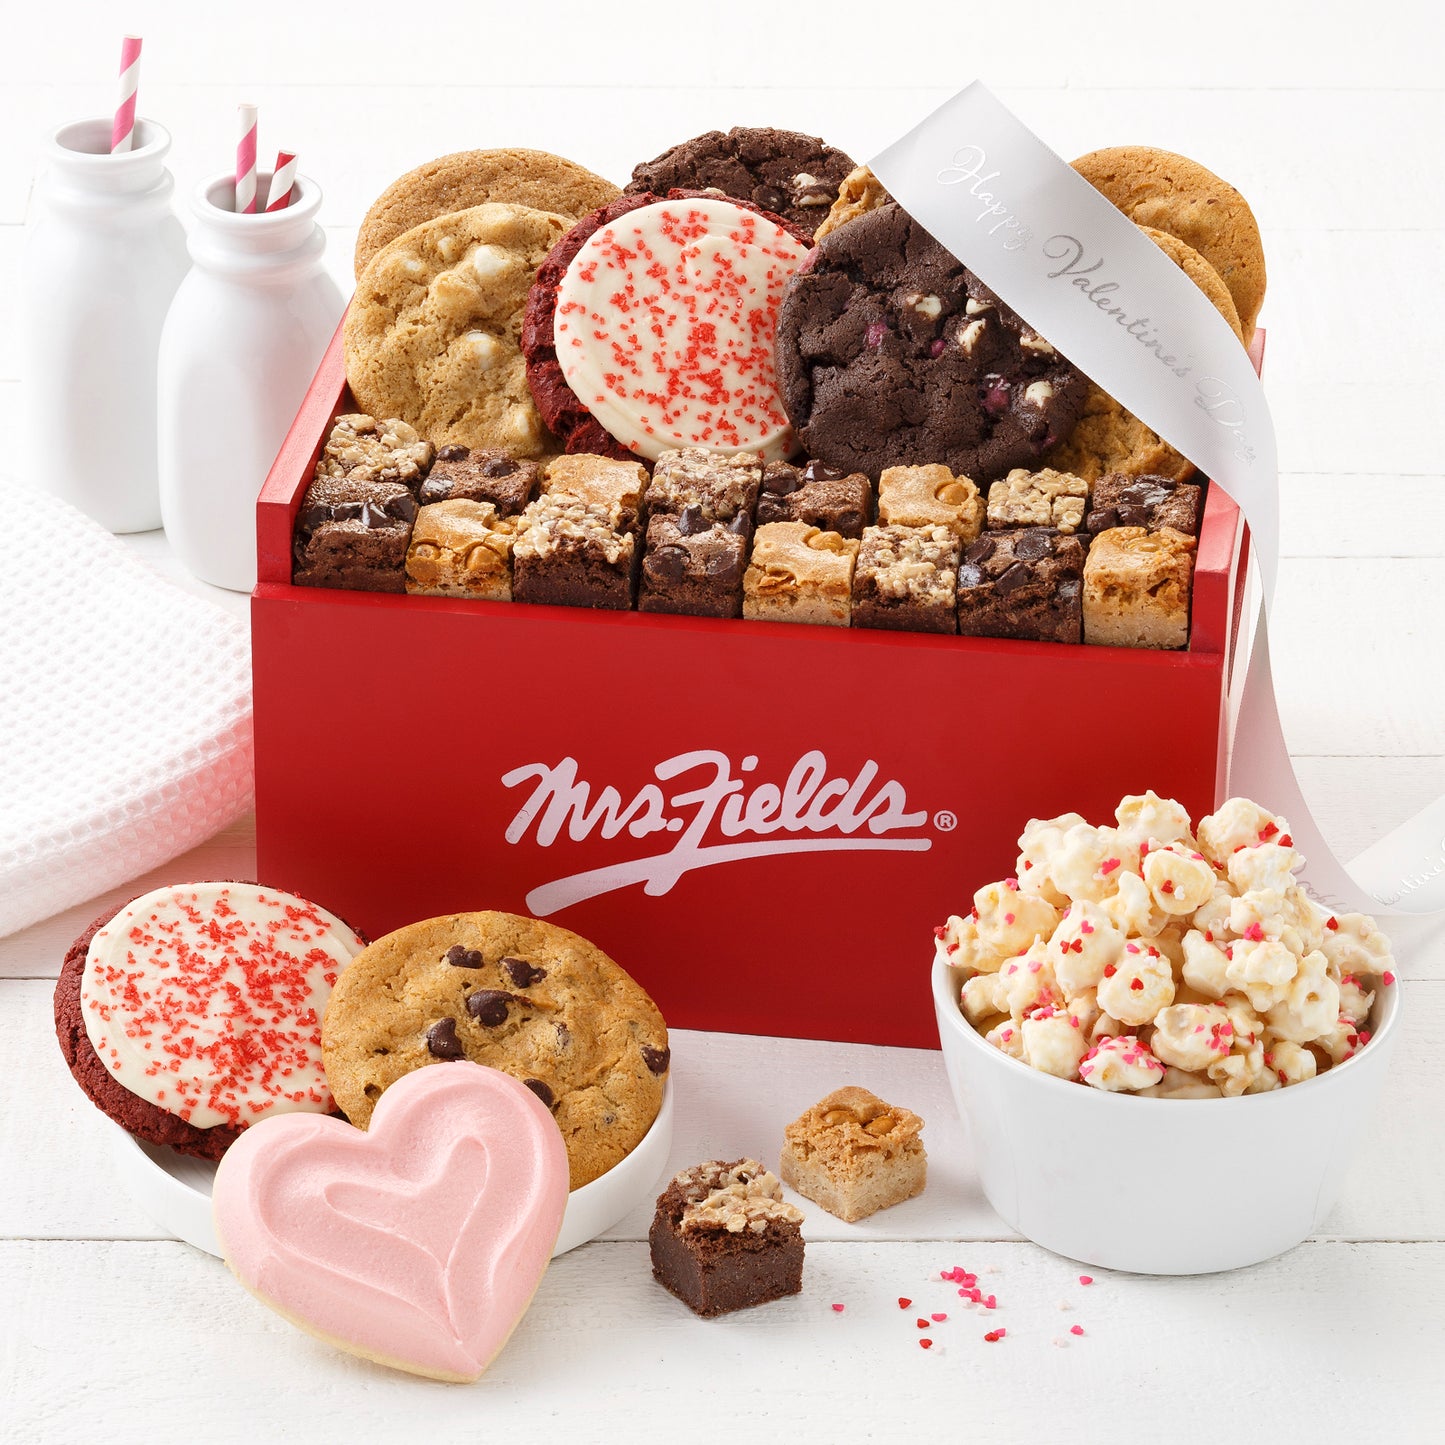 A red Mrs. Fields Signature wooden crate and filled with an assortment of original cookies, brownie bites, frosted cookies, and popcorn.